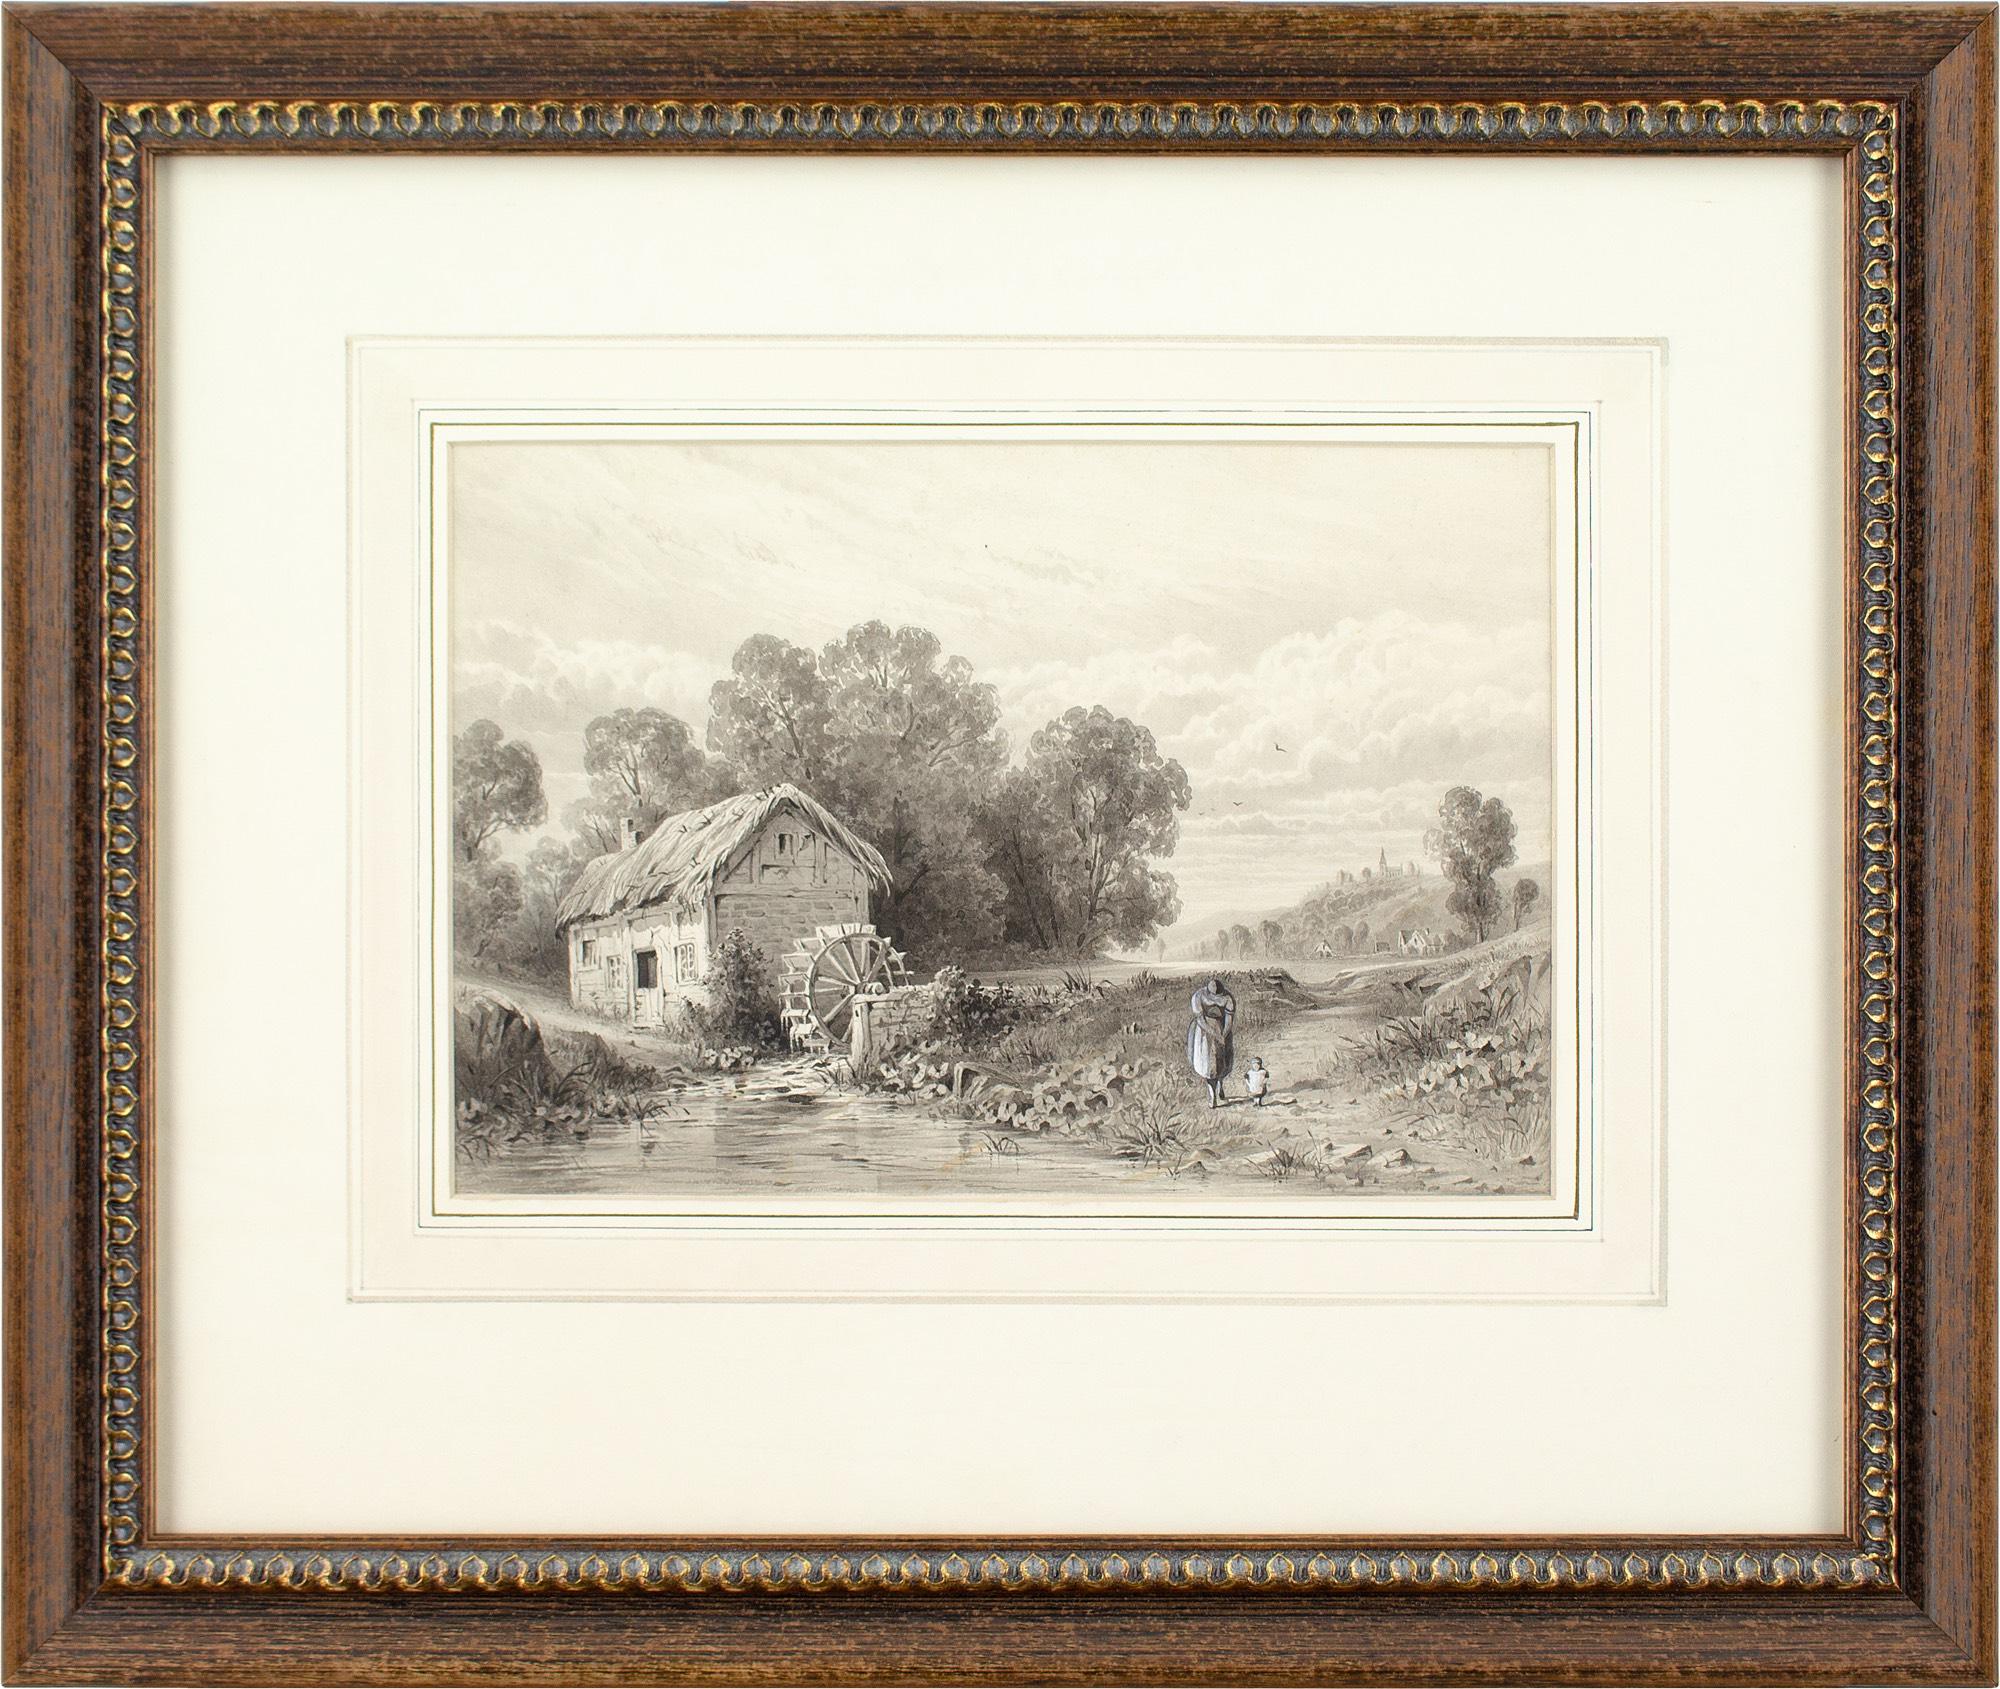 This charming 19th-century drawing by British artist Edmond Albert Joseph Tyrel de Poix (1840-1916) depicts a mother and child standing by a mill pond before a rustic watermill.

De Poix was a gentleman artist descended from French nobility. Born in